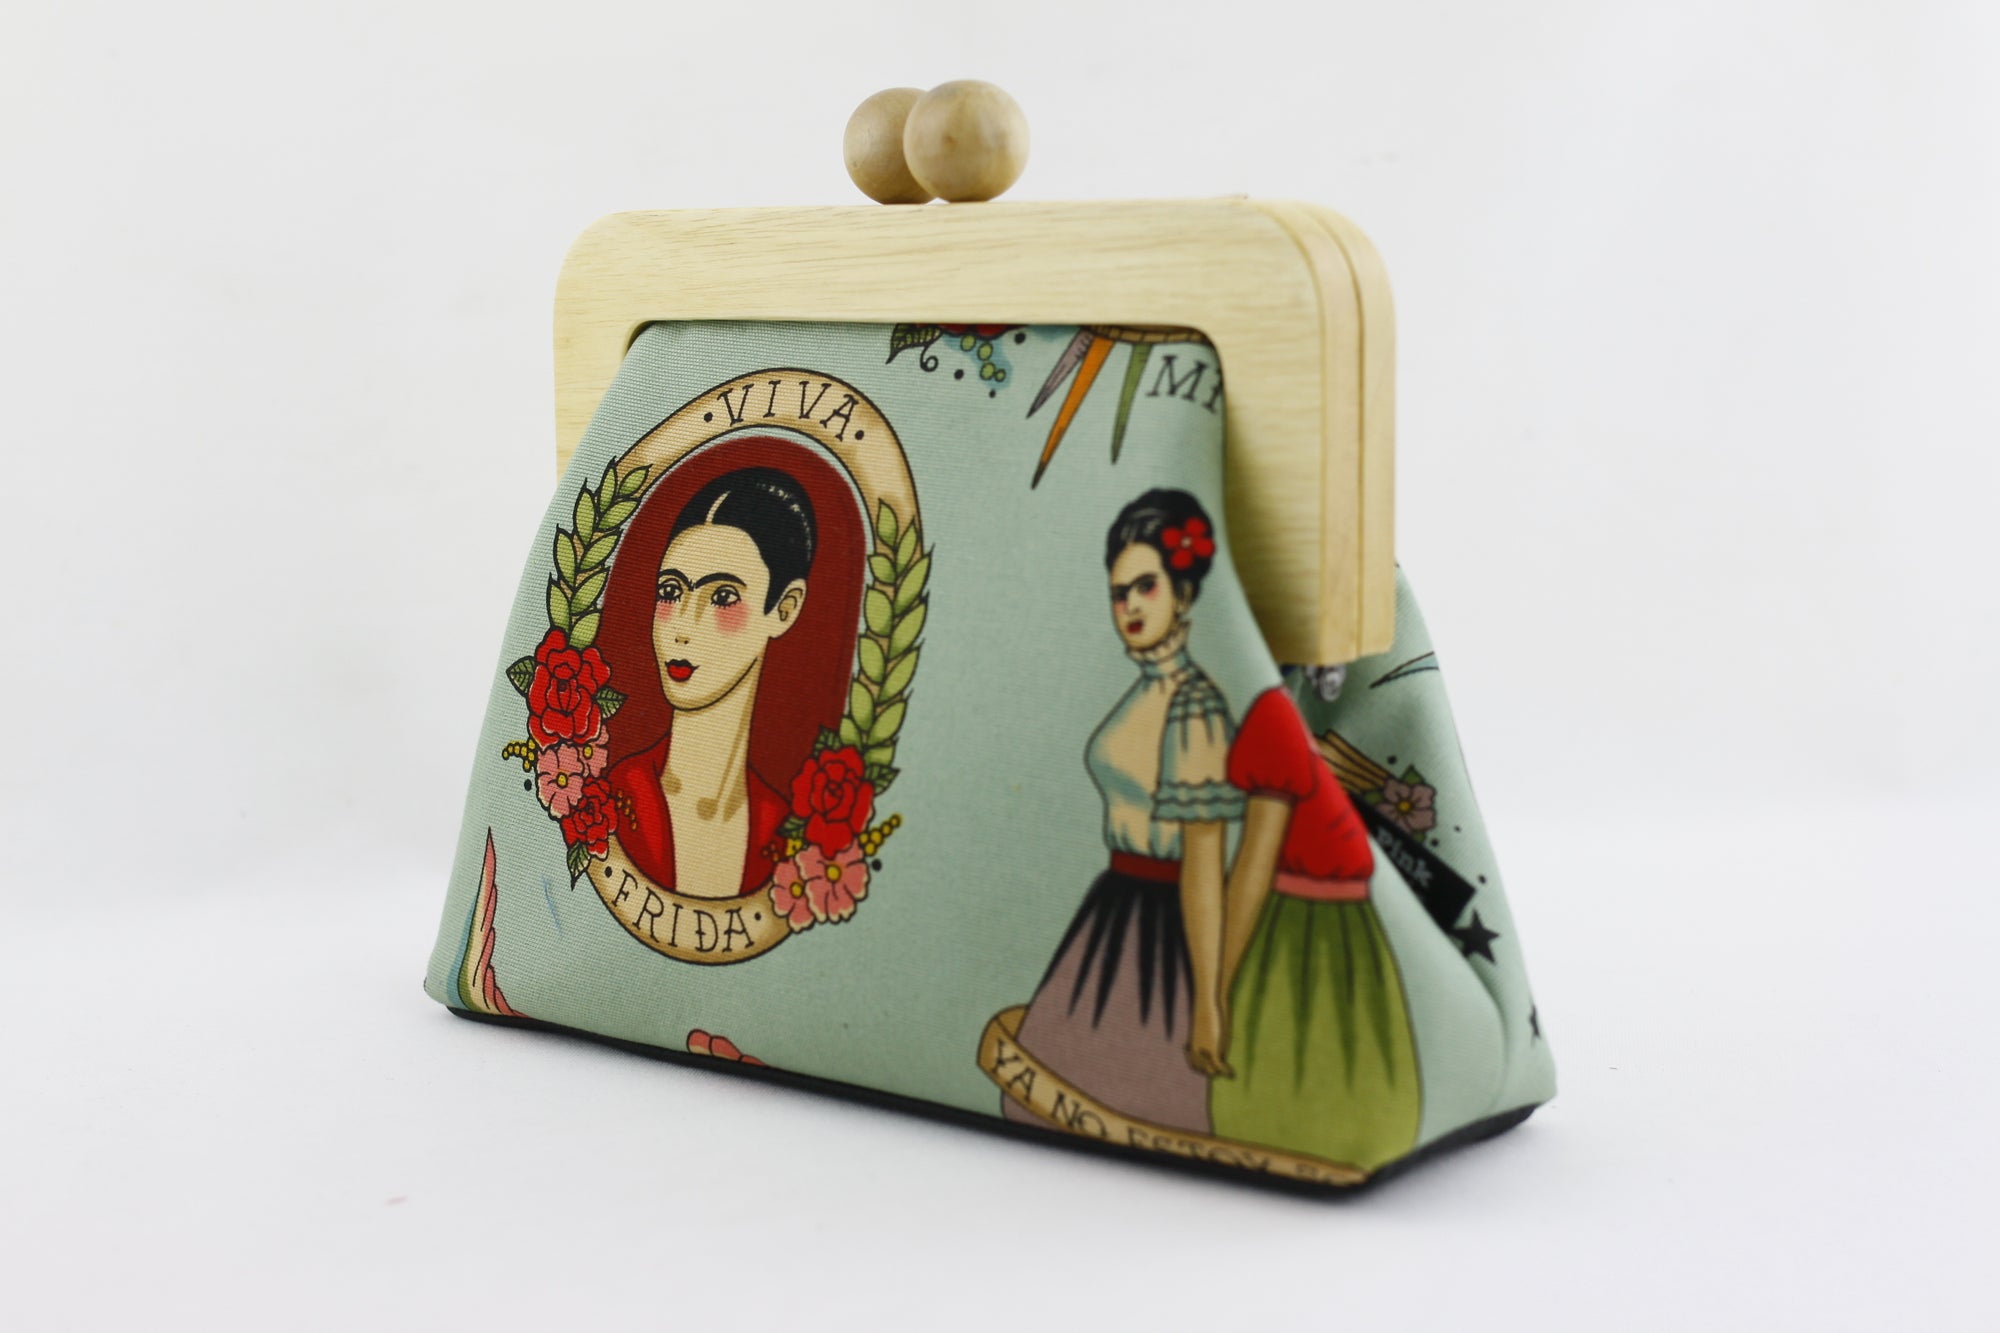 Frida and Flower Clutch Bag with Leather Strap | PINKOASIS